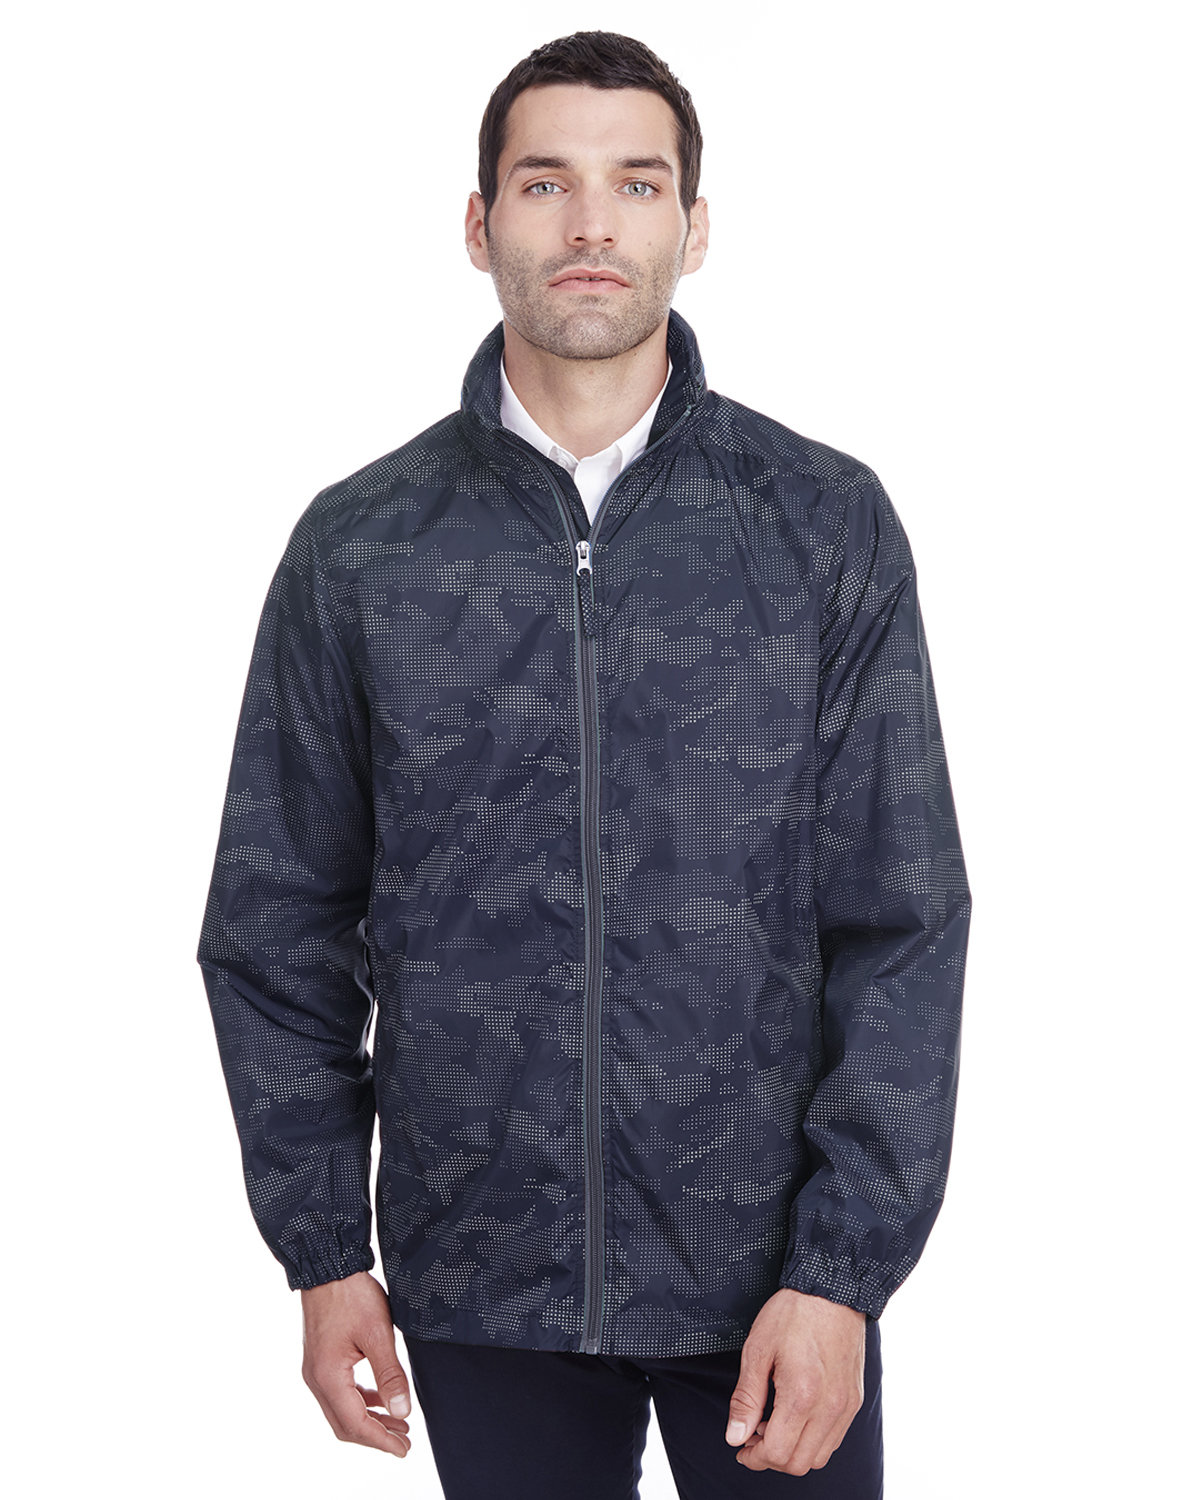 North End Men's Rotate Reflective Jacket CLASSC NVY/ CRBN 